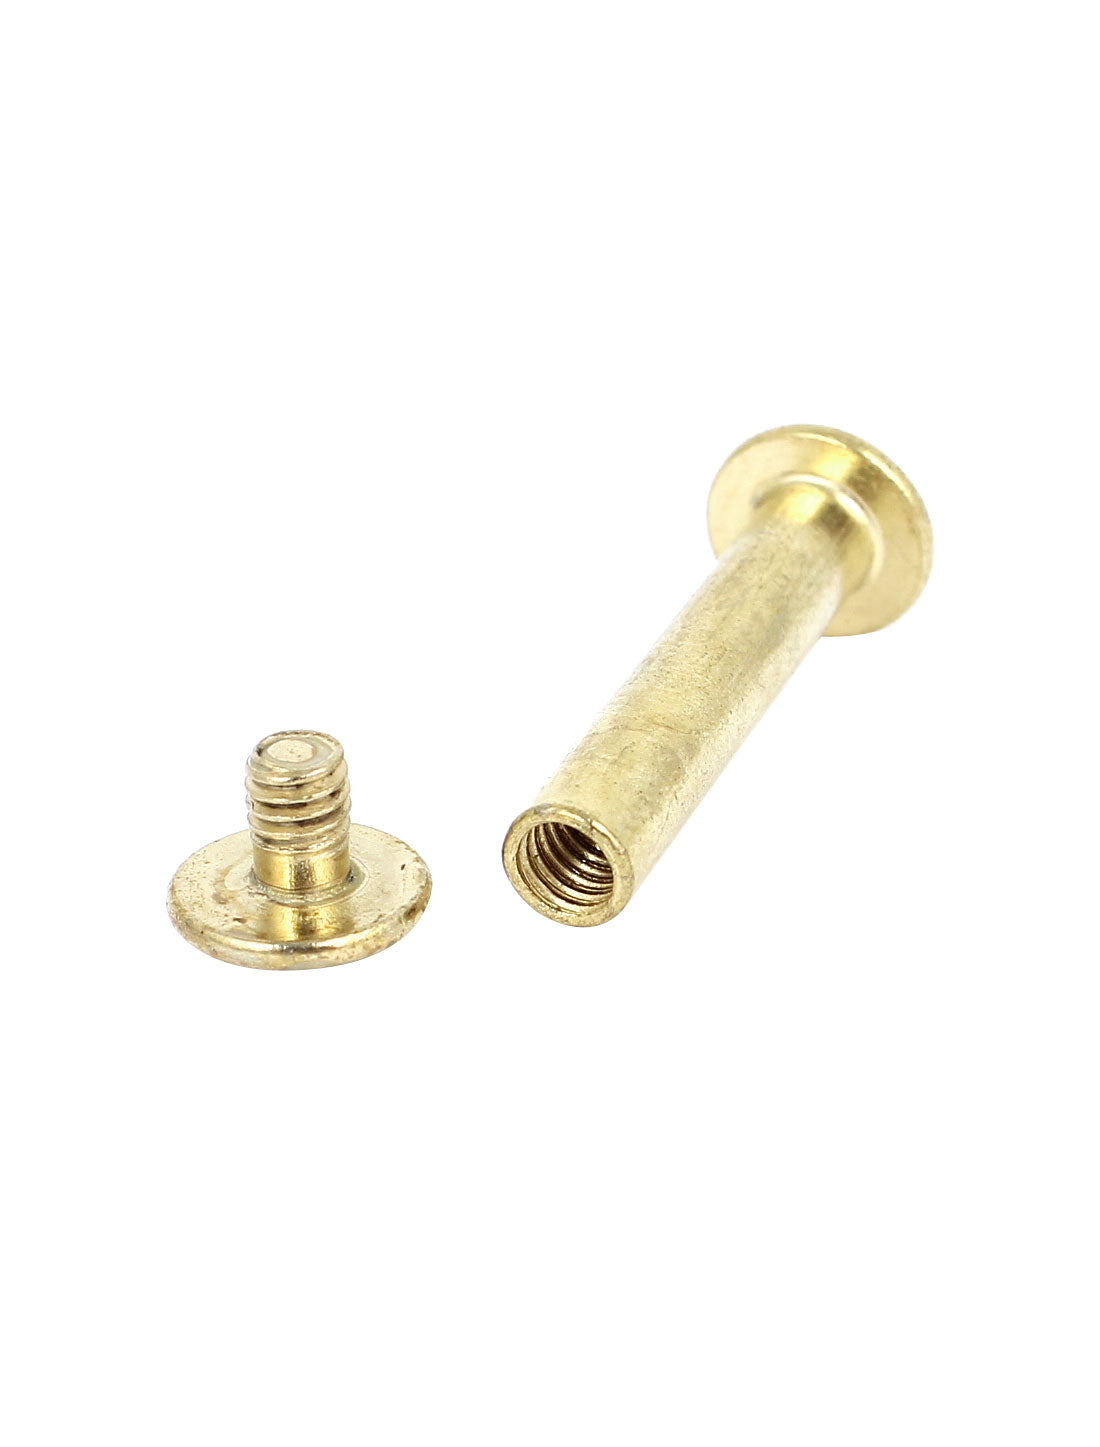 uxcell Uxcell Brass Plated 5x25mm Binding Chicago Screw Post 20pcs for Leather Scrapbook